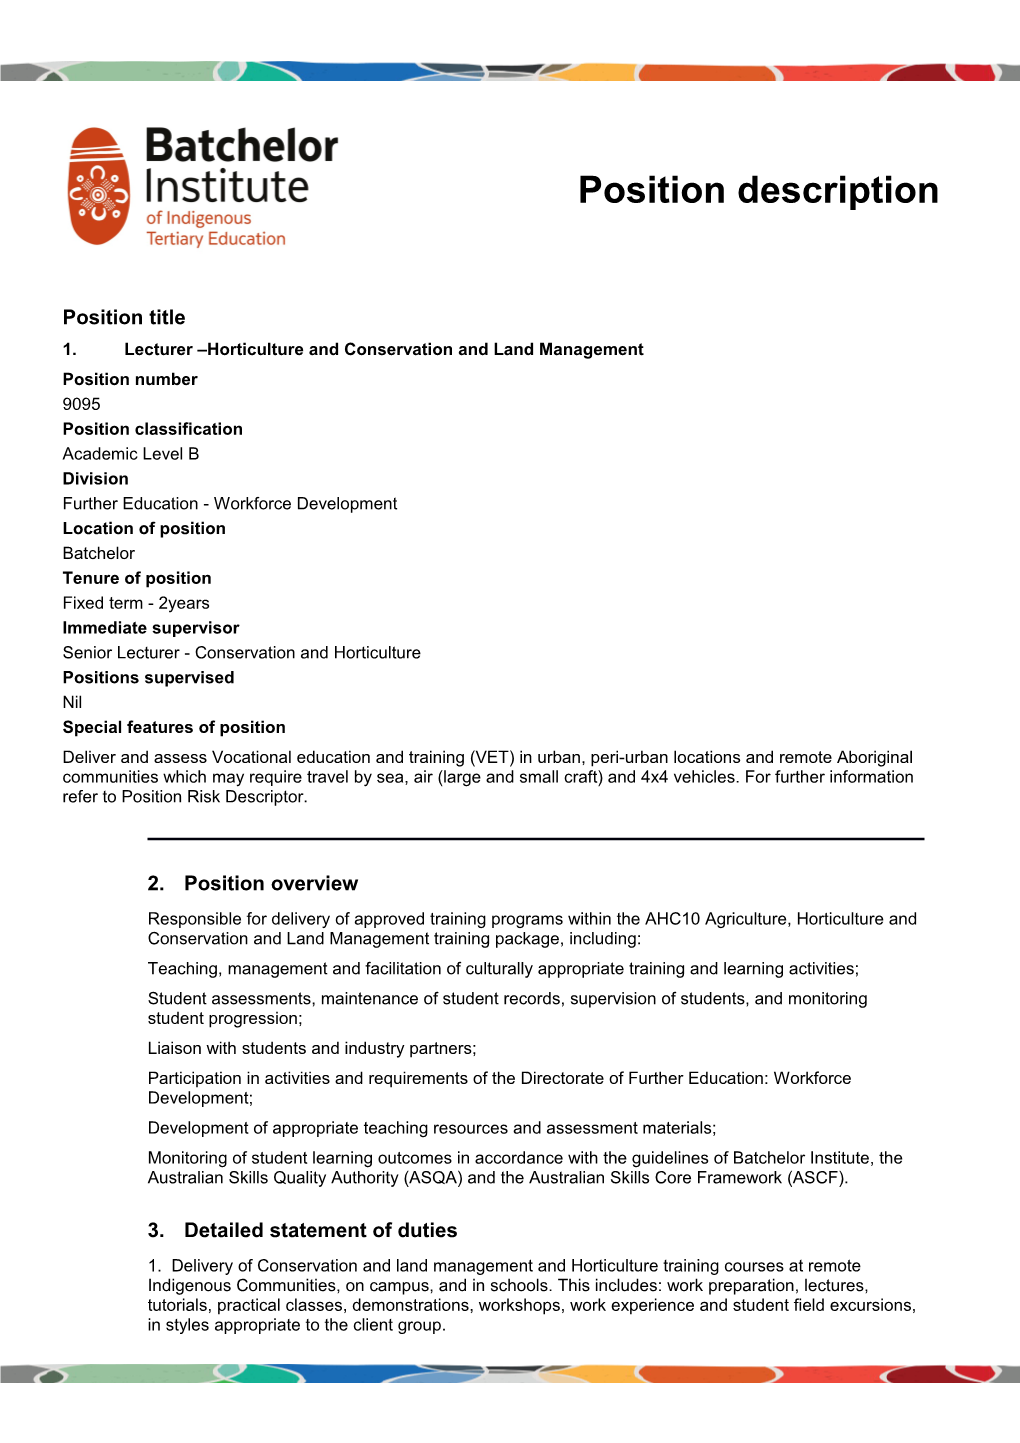 Lecturer Horticulture and Conservation and Land Management